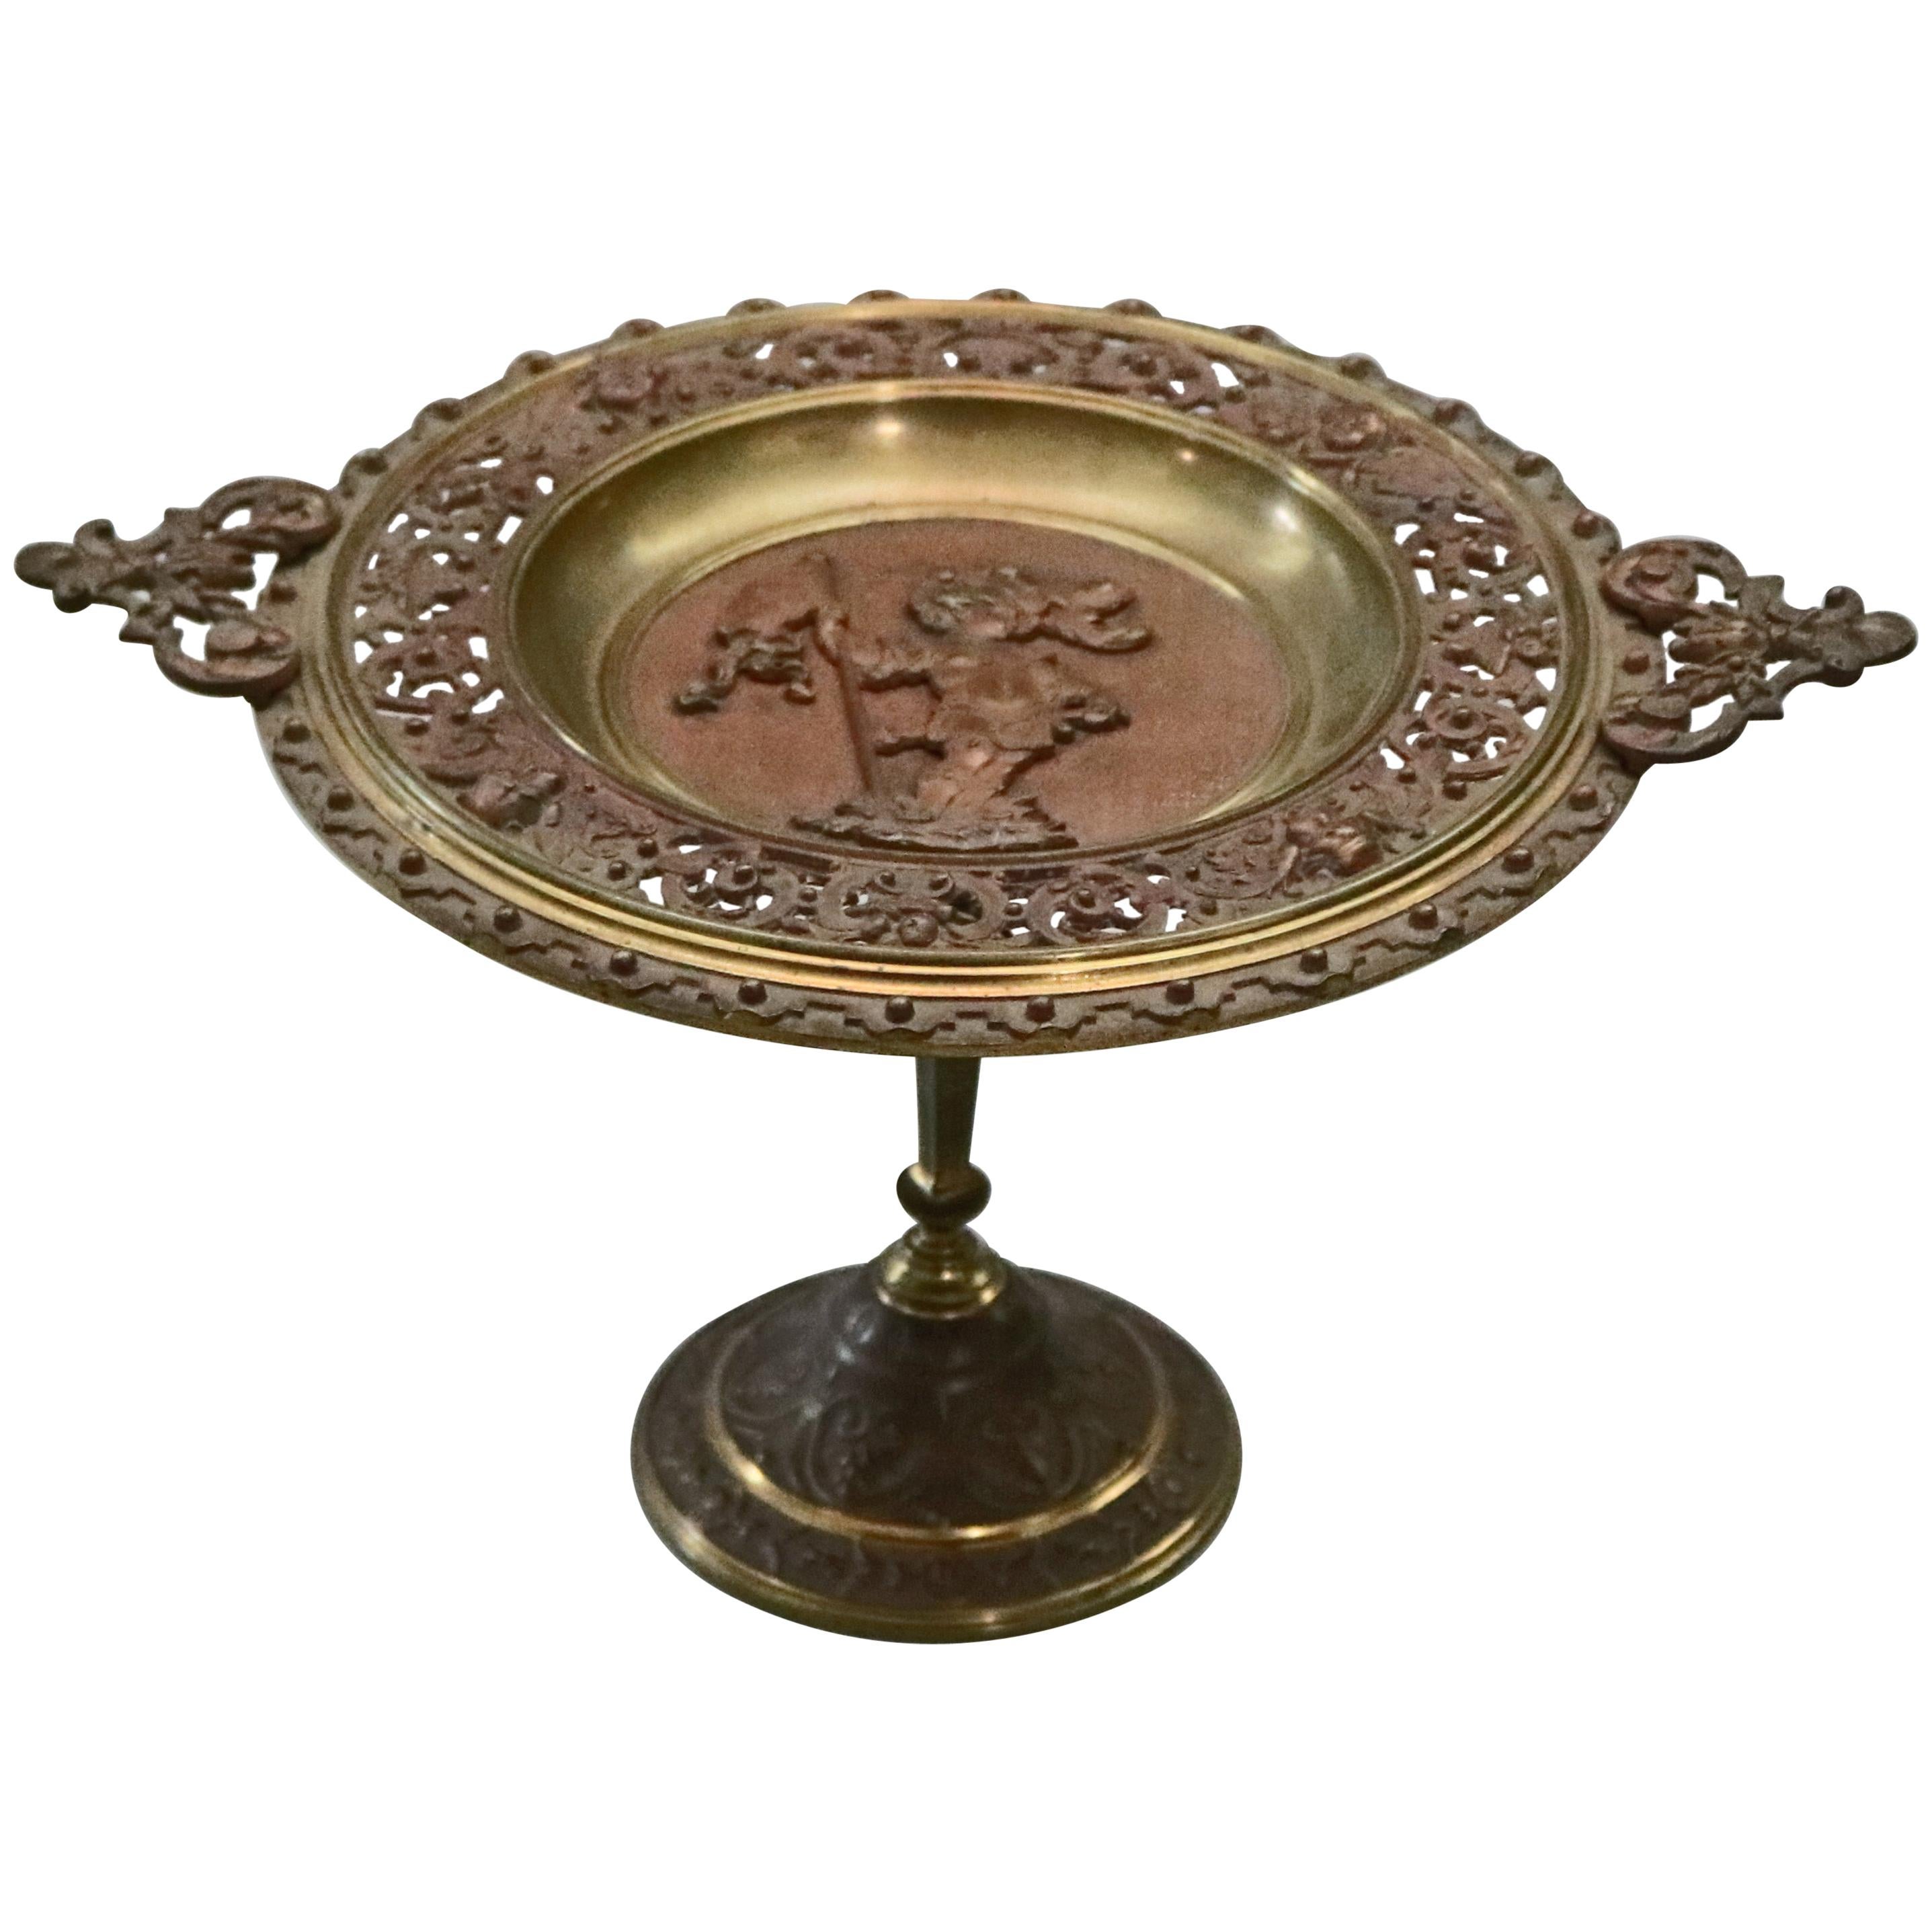 Antique Victorian Reticulated and Bronzed Pedestal Card Tray, PH Hammerman